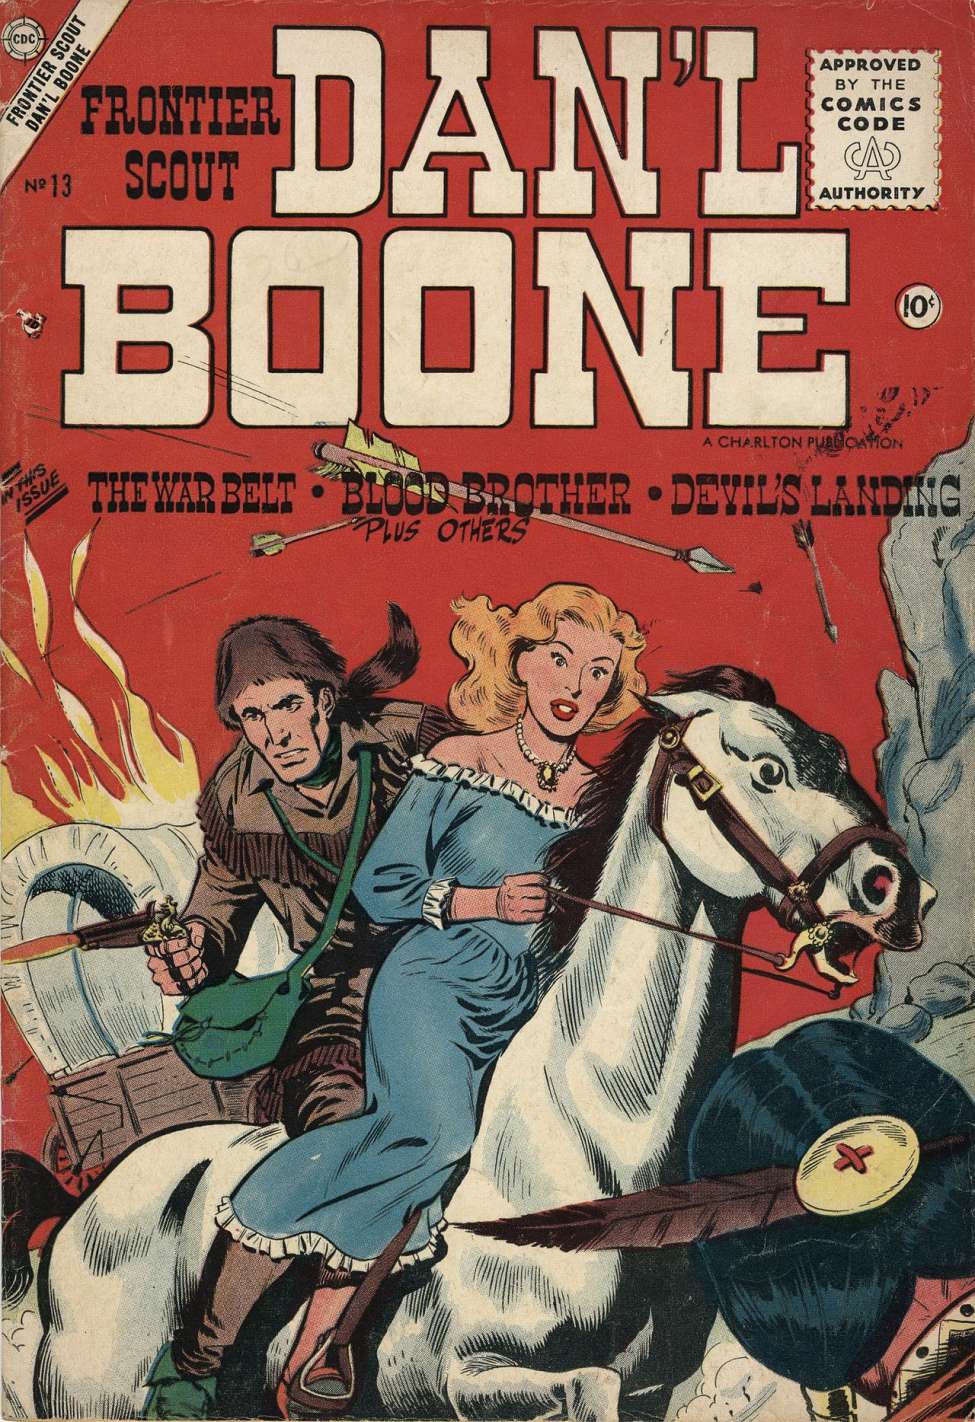 Book Cover For Frontier Scout, Dan'l Boone 13